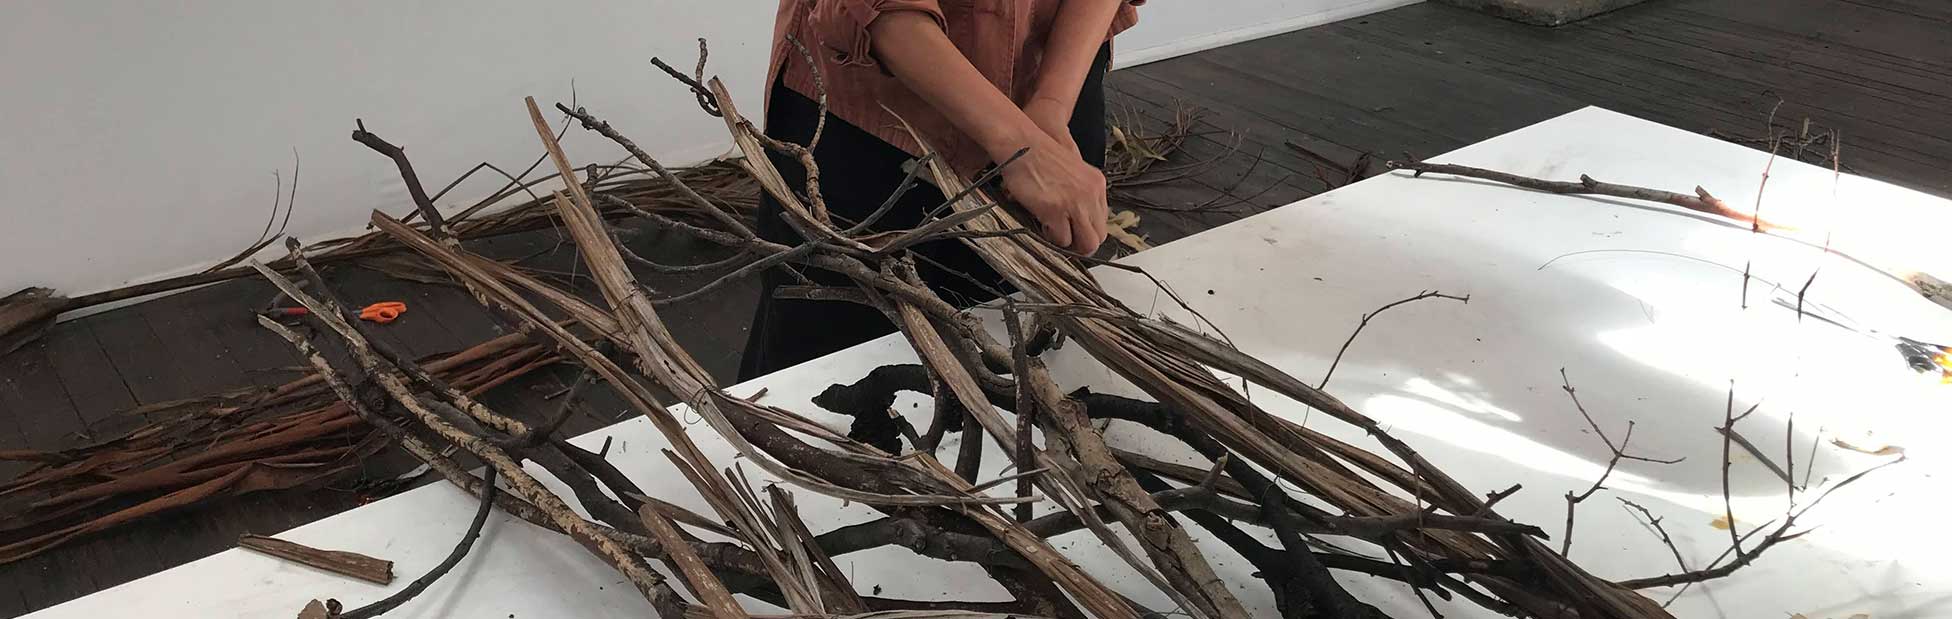 image of a lady with sticks